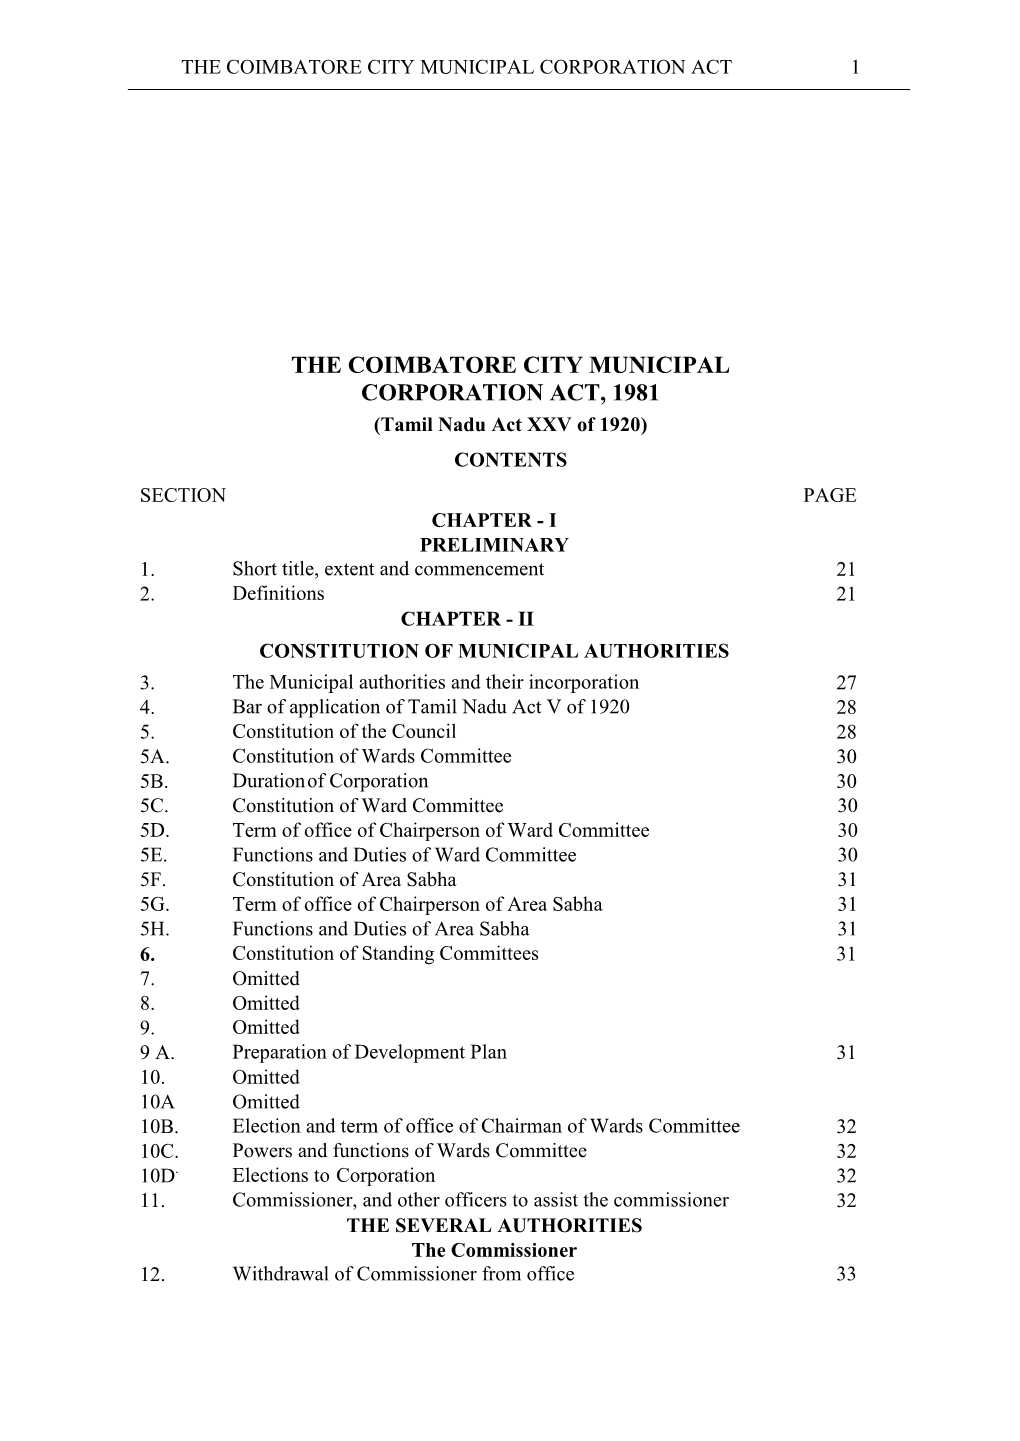 THE COIMBATORE CITY MUNICIPAL CORPORATION ACT, 1981 (Tamil Nadu Act XXV of 1920) CONTENTS SECTION PAGE CHAPTER - I PRELIMINARY 1